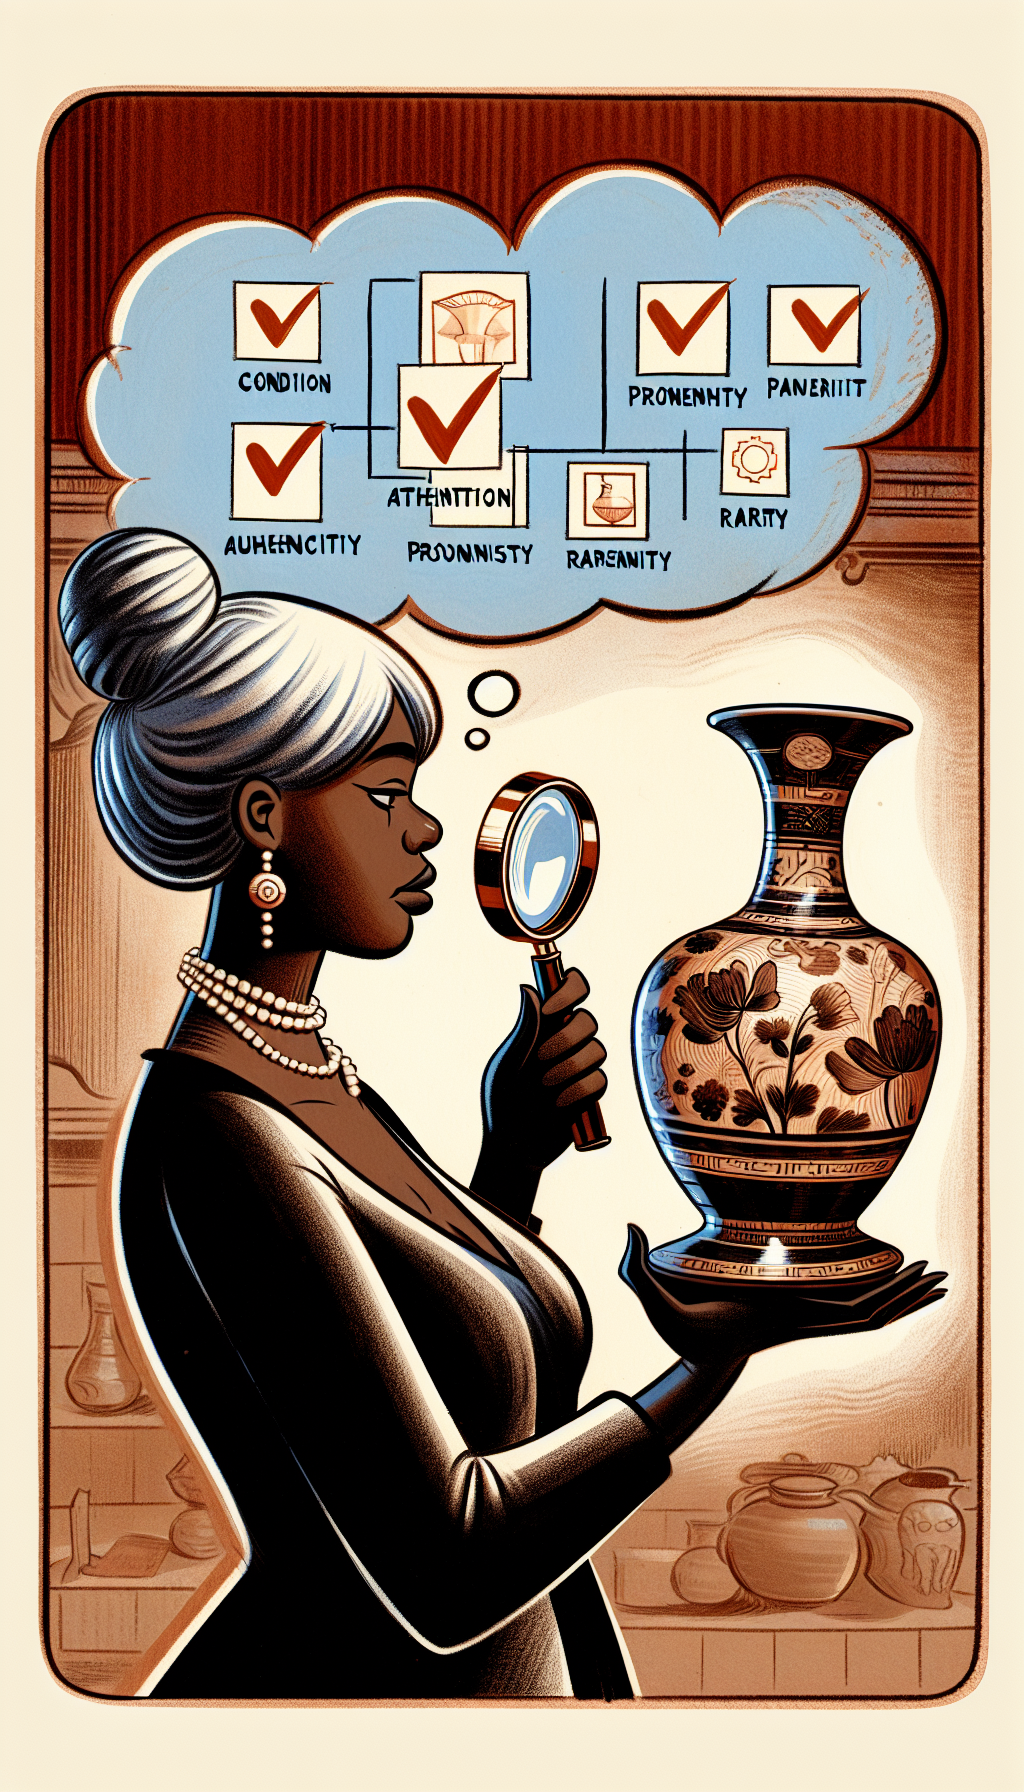 An illustration depicts an appraiser with a magnifying glass closely inspecting an antique vase, with checkmarks in thought bubbles featuring symbols for condition, authenticity, provenance, and rarity. The magnifying glass reveals detailed patterns on the vase, turning parts into a semi-transparent view with historical dates and maker’s marks emphasized, blending watercolor and line art styles.